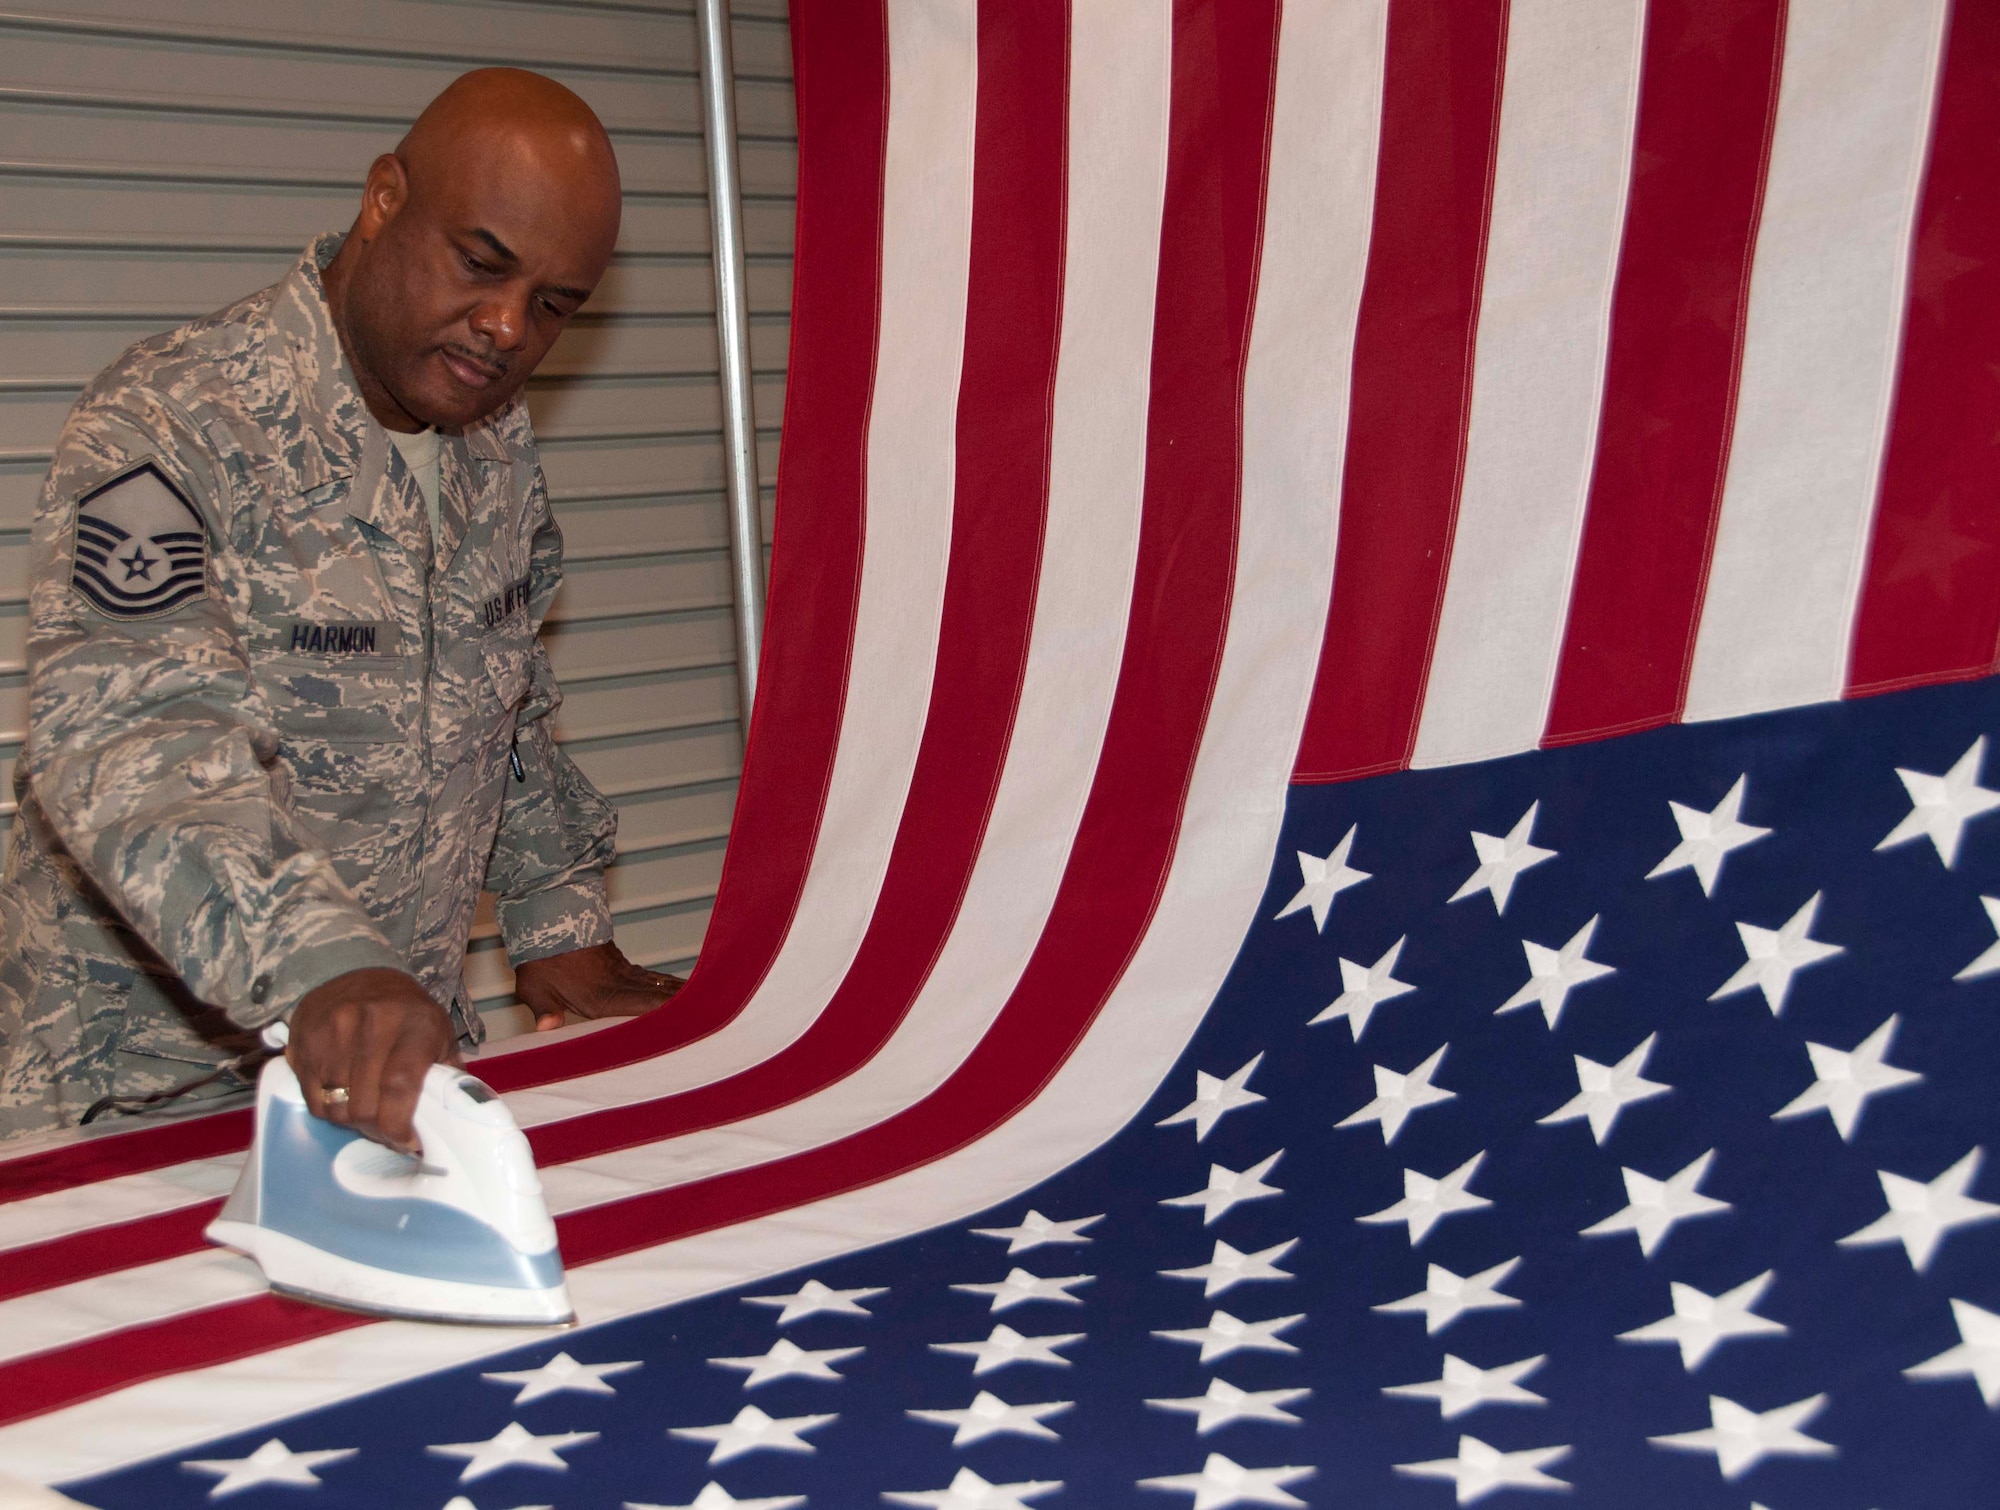 Master Sgt. Tony Harmon, Departures noncommissioned officer in charge, presses a flag at the Charles C. Carson Center for Mortuary Affairs Sept. 2, 2011. As the nation prepares to celebrate Labor Day, the sacred mission of honoring the fallen continues behind closed doors. For Harmon, it is a labor of love. He has deployed to the mortuary more than 10 times to support the mission. Harmon is a reservist with the 512th Memorial Affairs Squadron, Dover Air Force Base, Del. (U.S. Air Force photo/Christin Michaud)
